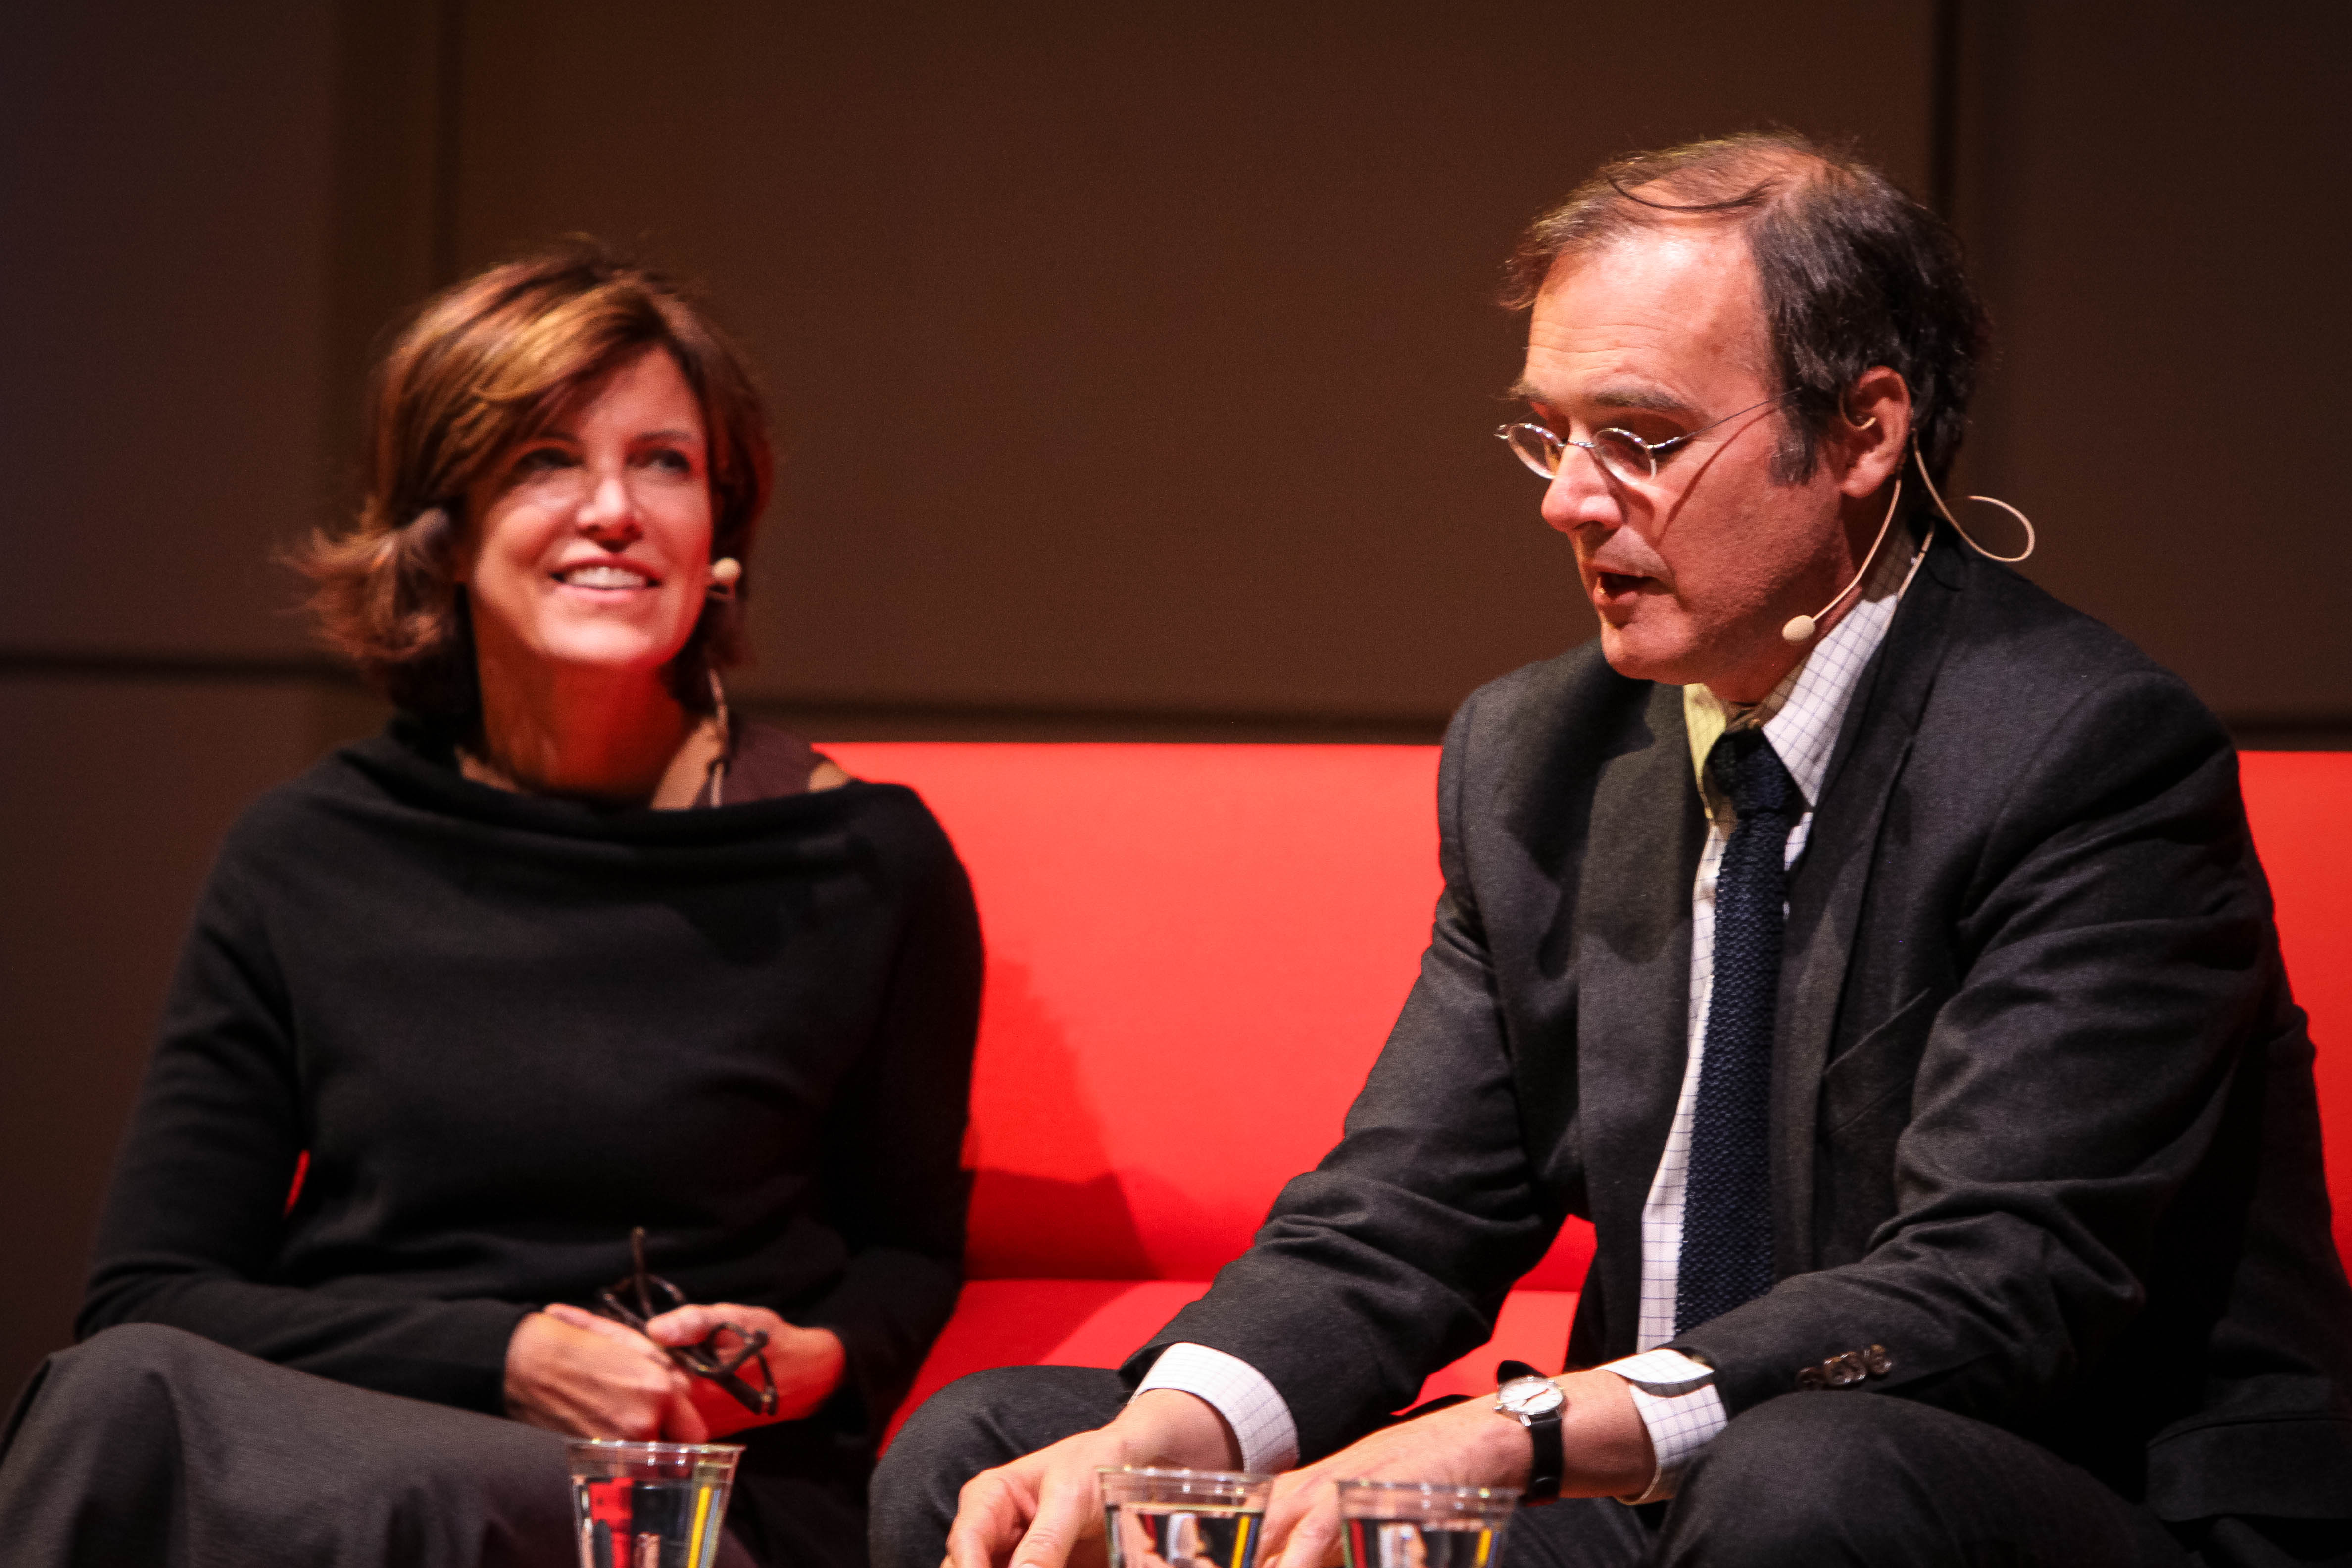 Photograph of Jeanne Gang and Barry Bergdoll in conversation on stage.